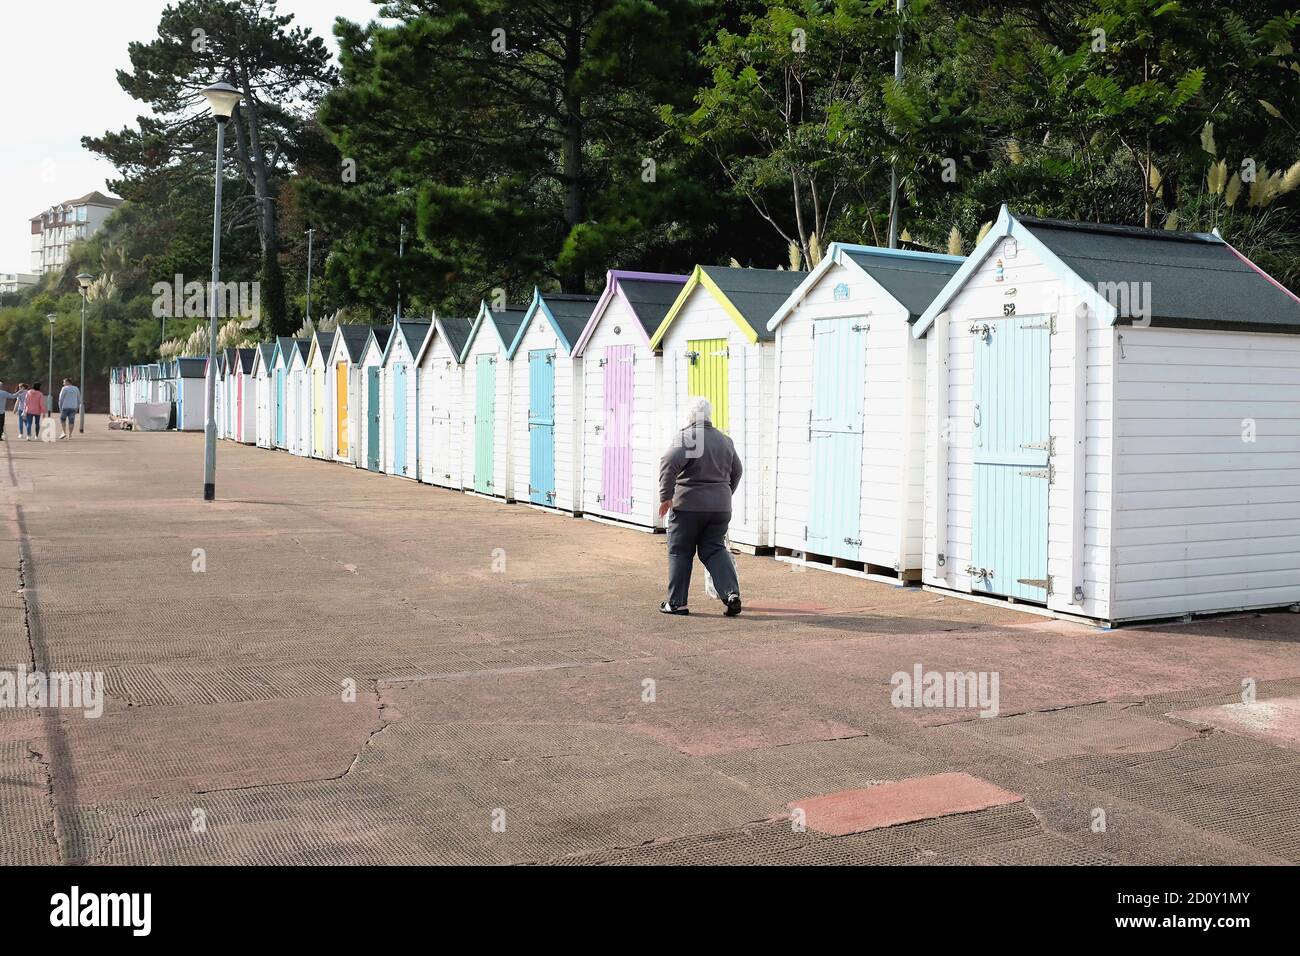 Goodrngton, Devon, UK. September 18, 2020. Holidaymakers walking the promenade in front of Colorful beach huts at Goodrington at Paignton in Devon, UK Stock Photo